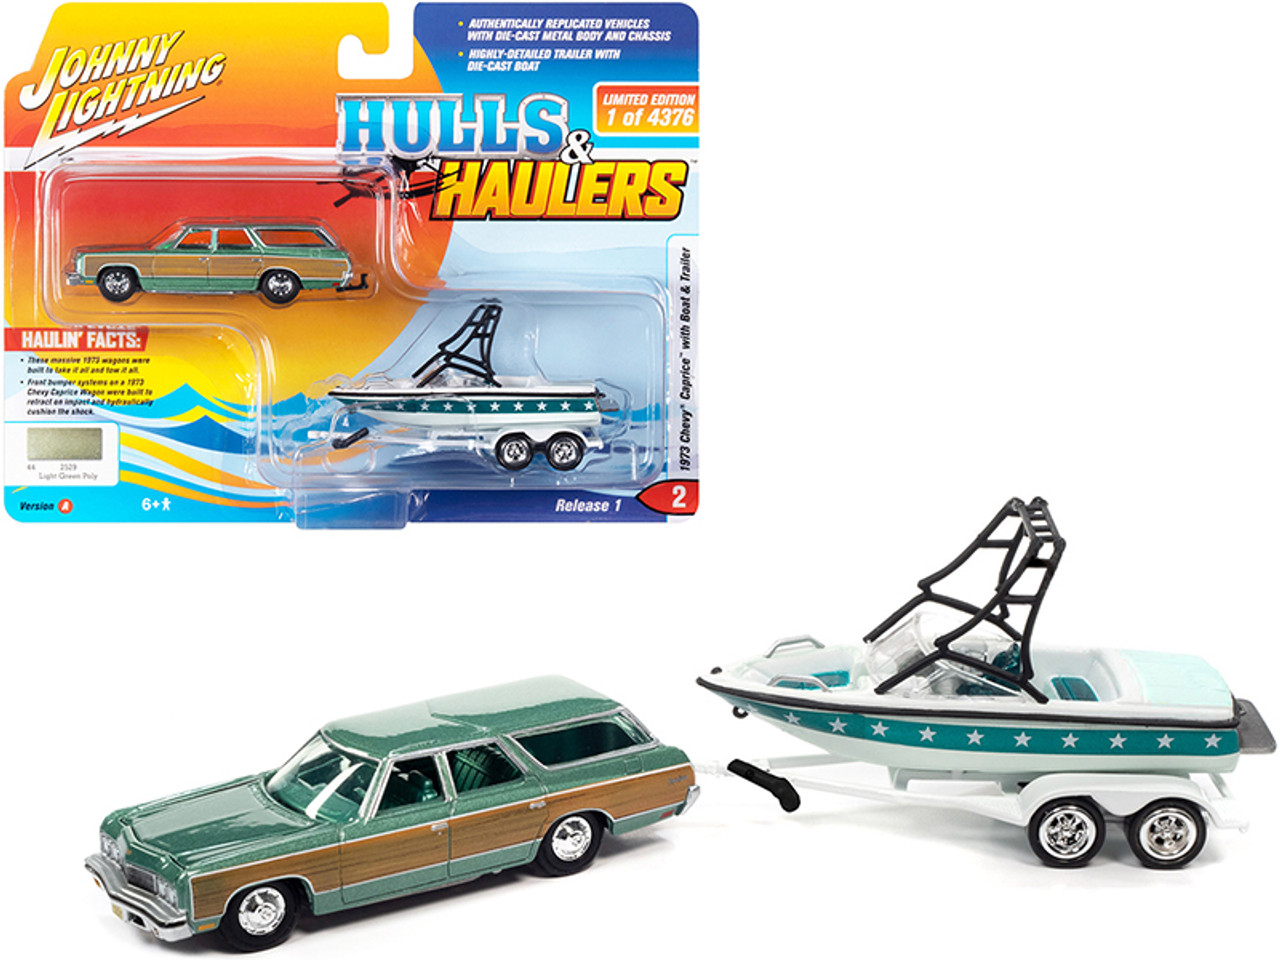 1973 Chevrolet Caprice Wagon Light Green Metallic with Woodgrain Sides with Mastercraft Boat and Trailer Limited Edition to 4376 pieces Worldwide "Hulls & Haulers" Series 1/64 Diecast Model Car by Johnny Lightning